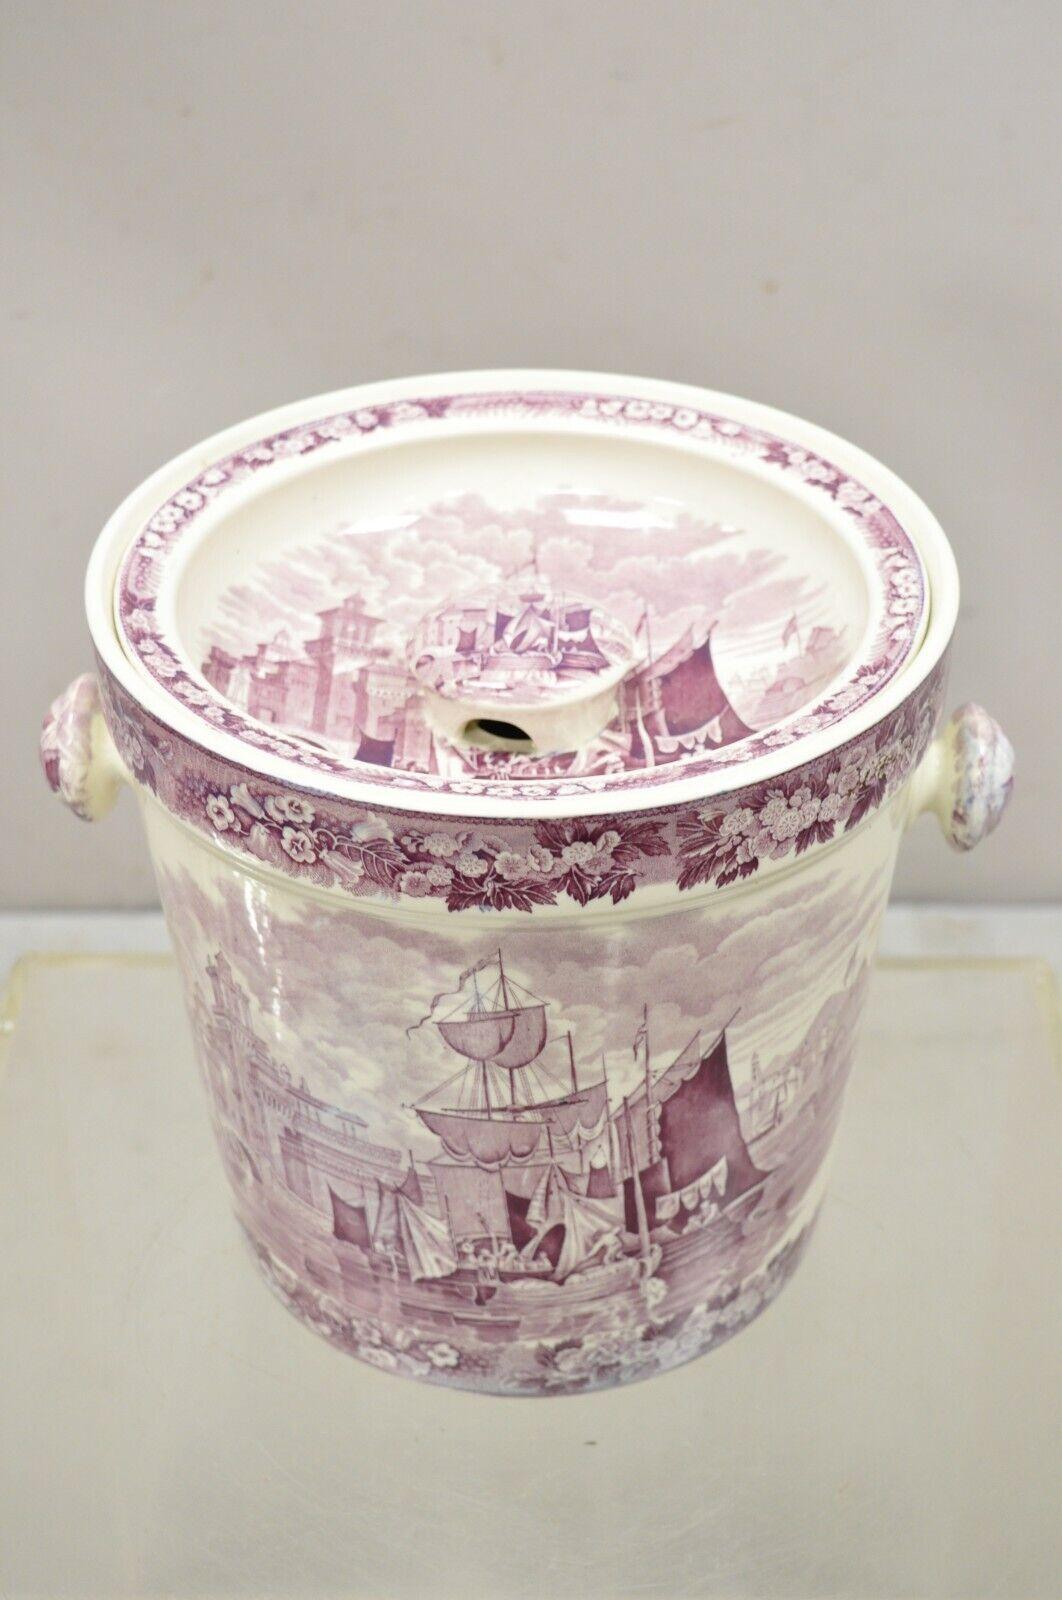 Antique Wedgwood Ferrara Etruria Plum Purple Porcelain Lidded Chamber Slop Pot. Item featured is a very rare model, decorated removable lid with holes, attractive purple 